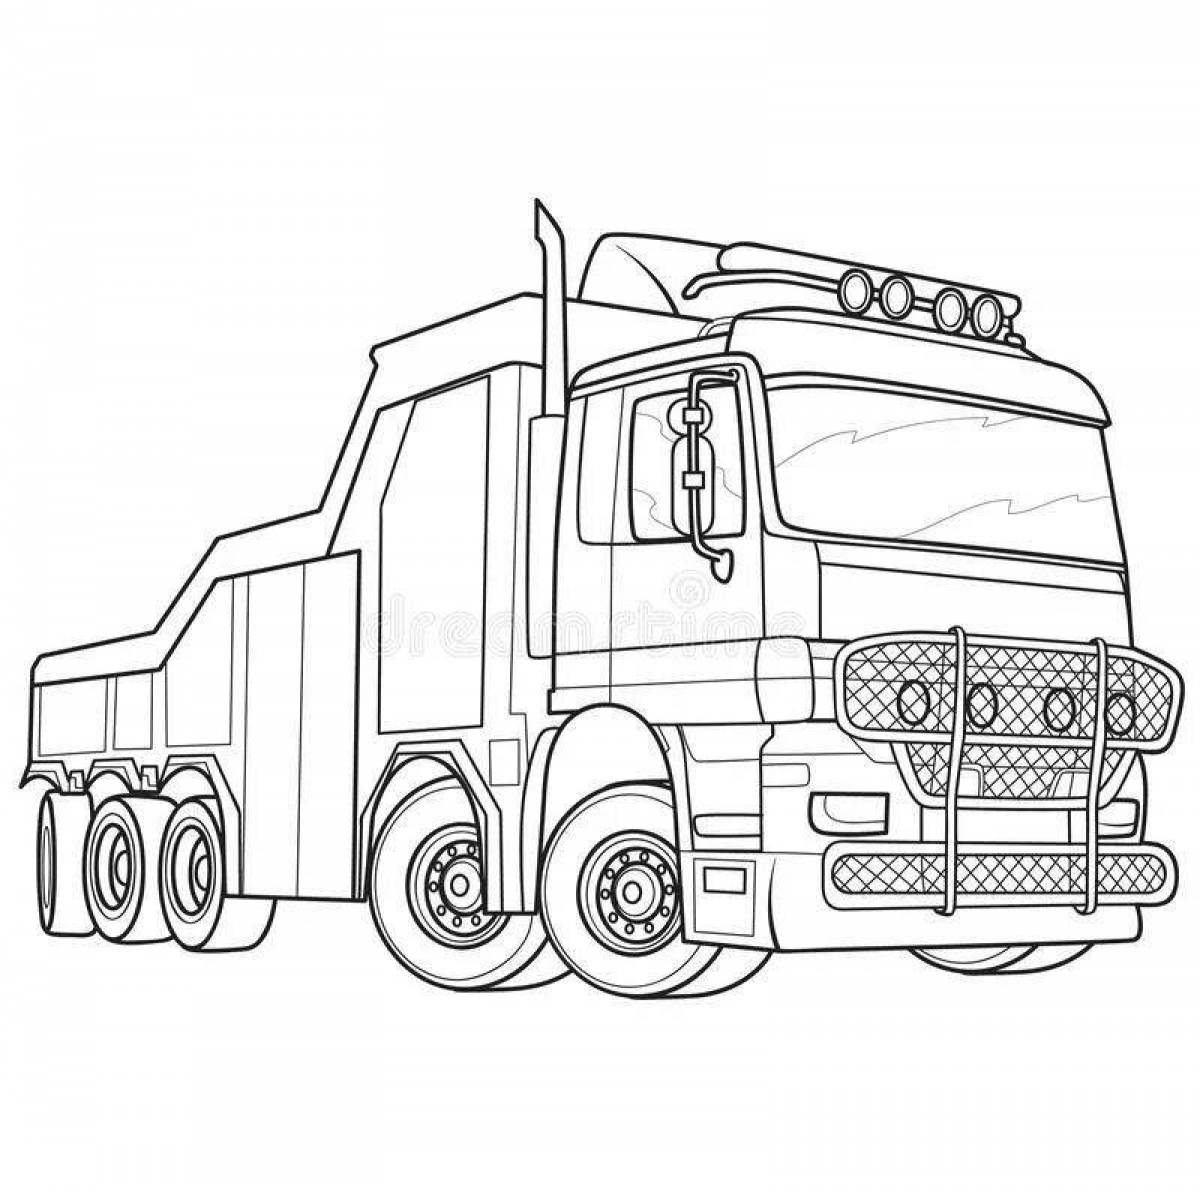 Glamorous male truck coloring page